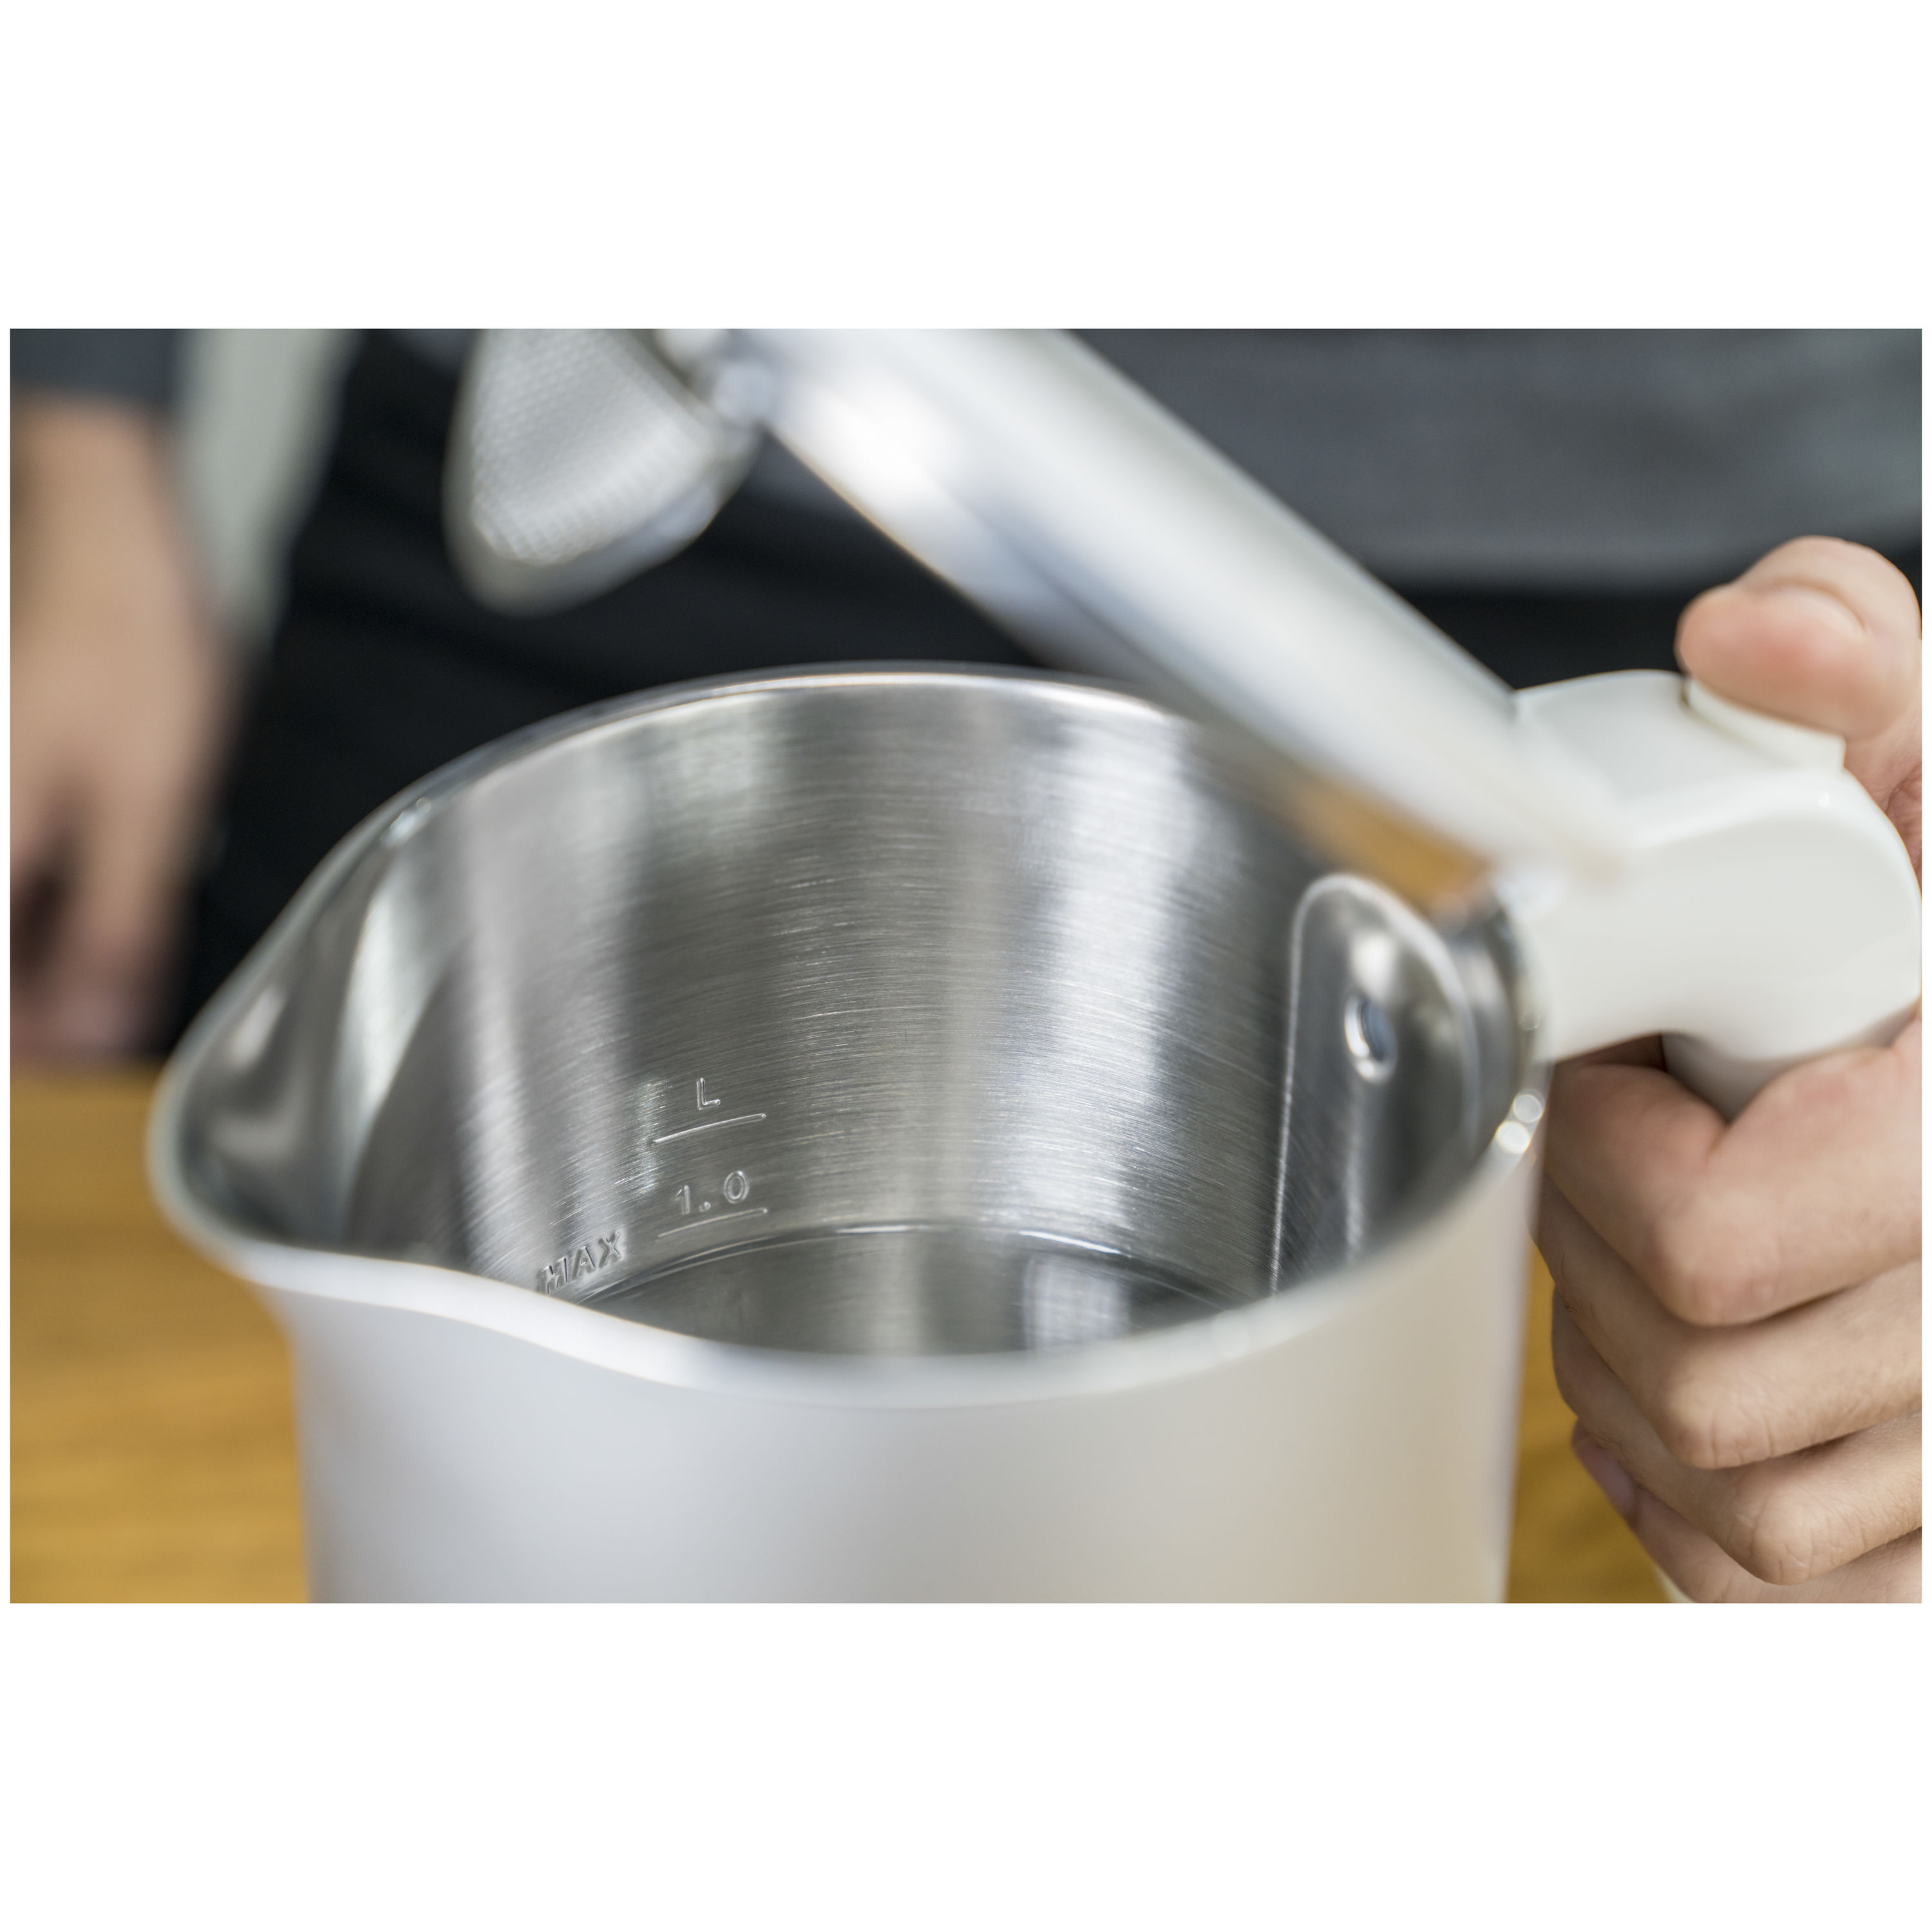 ZWILLING Enfinigy 1 l, Electric kettle